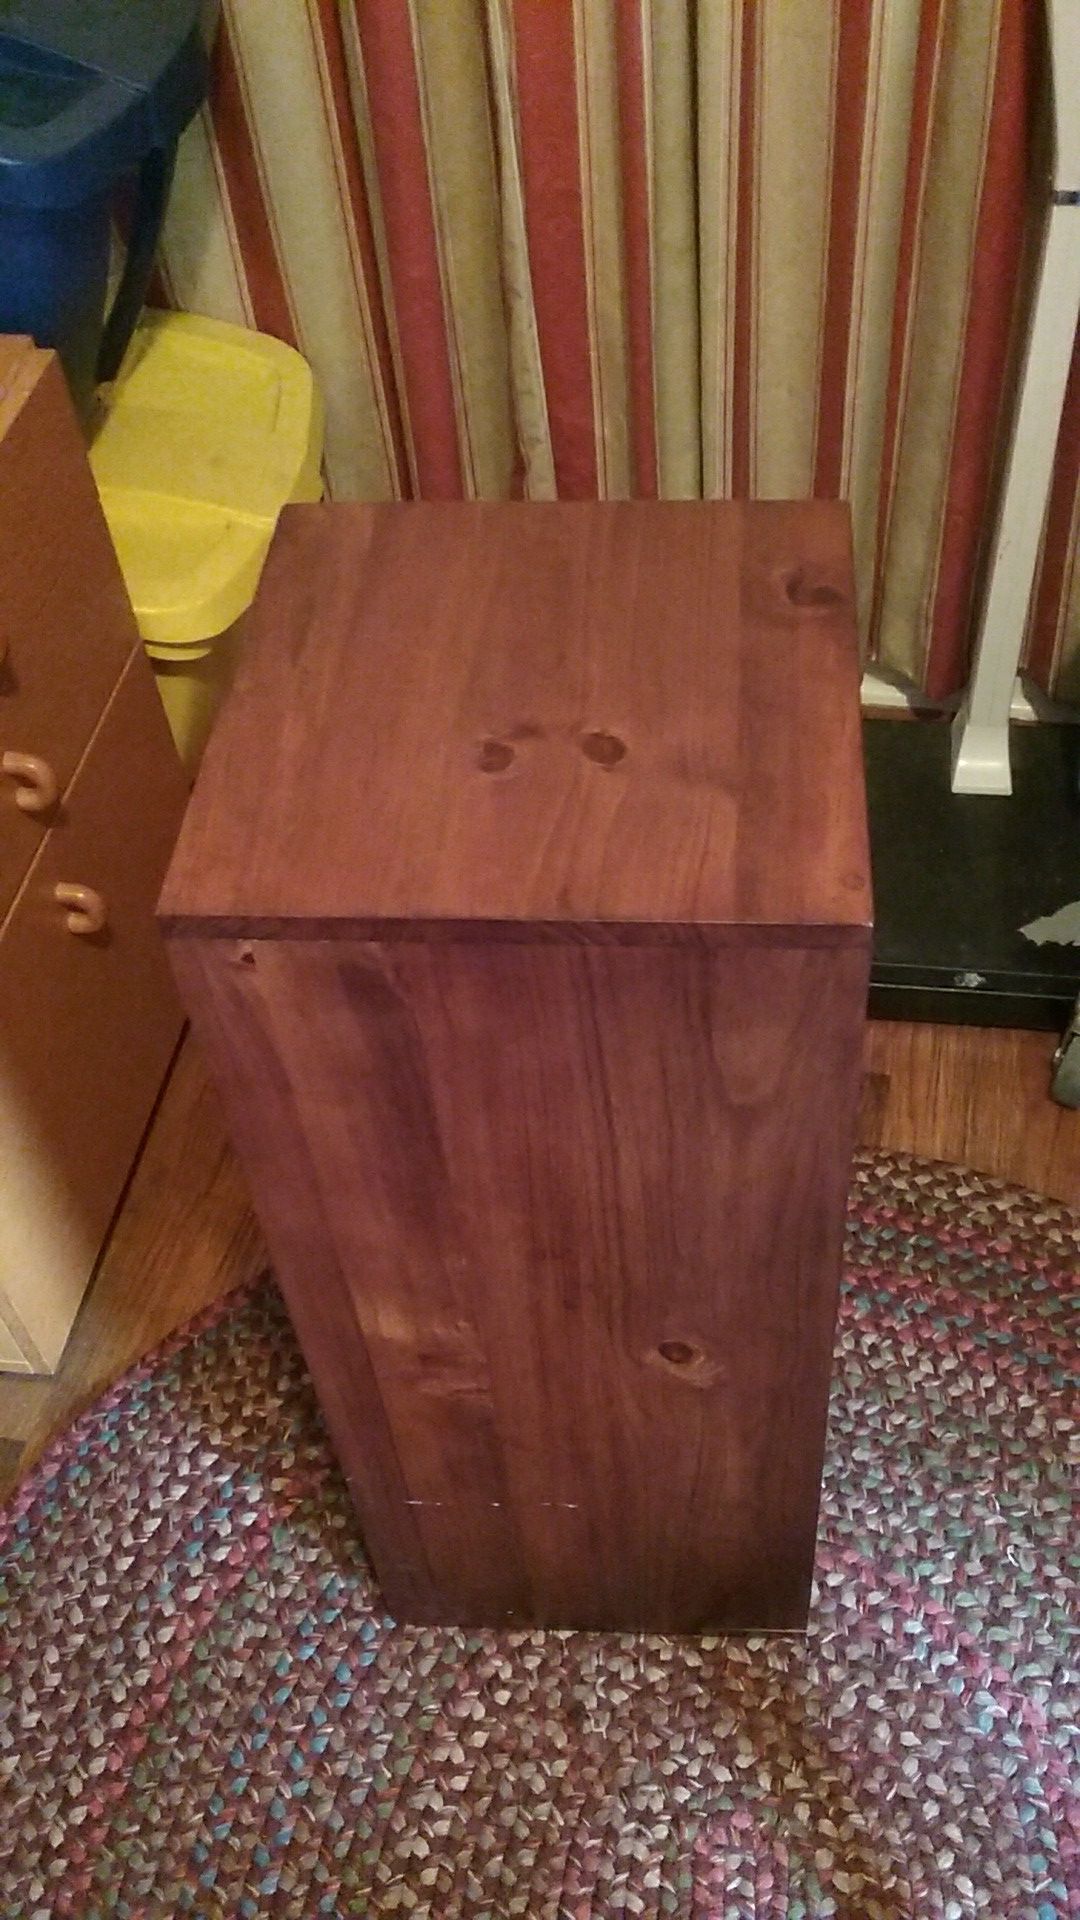 2 wood plant stands 12x12"x 29 3/4" High